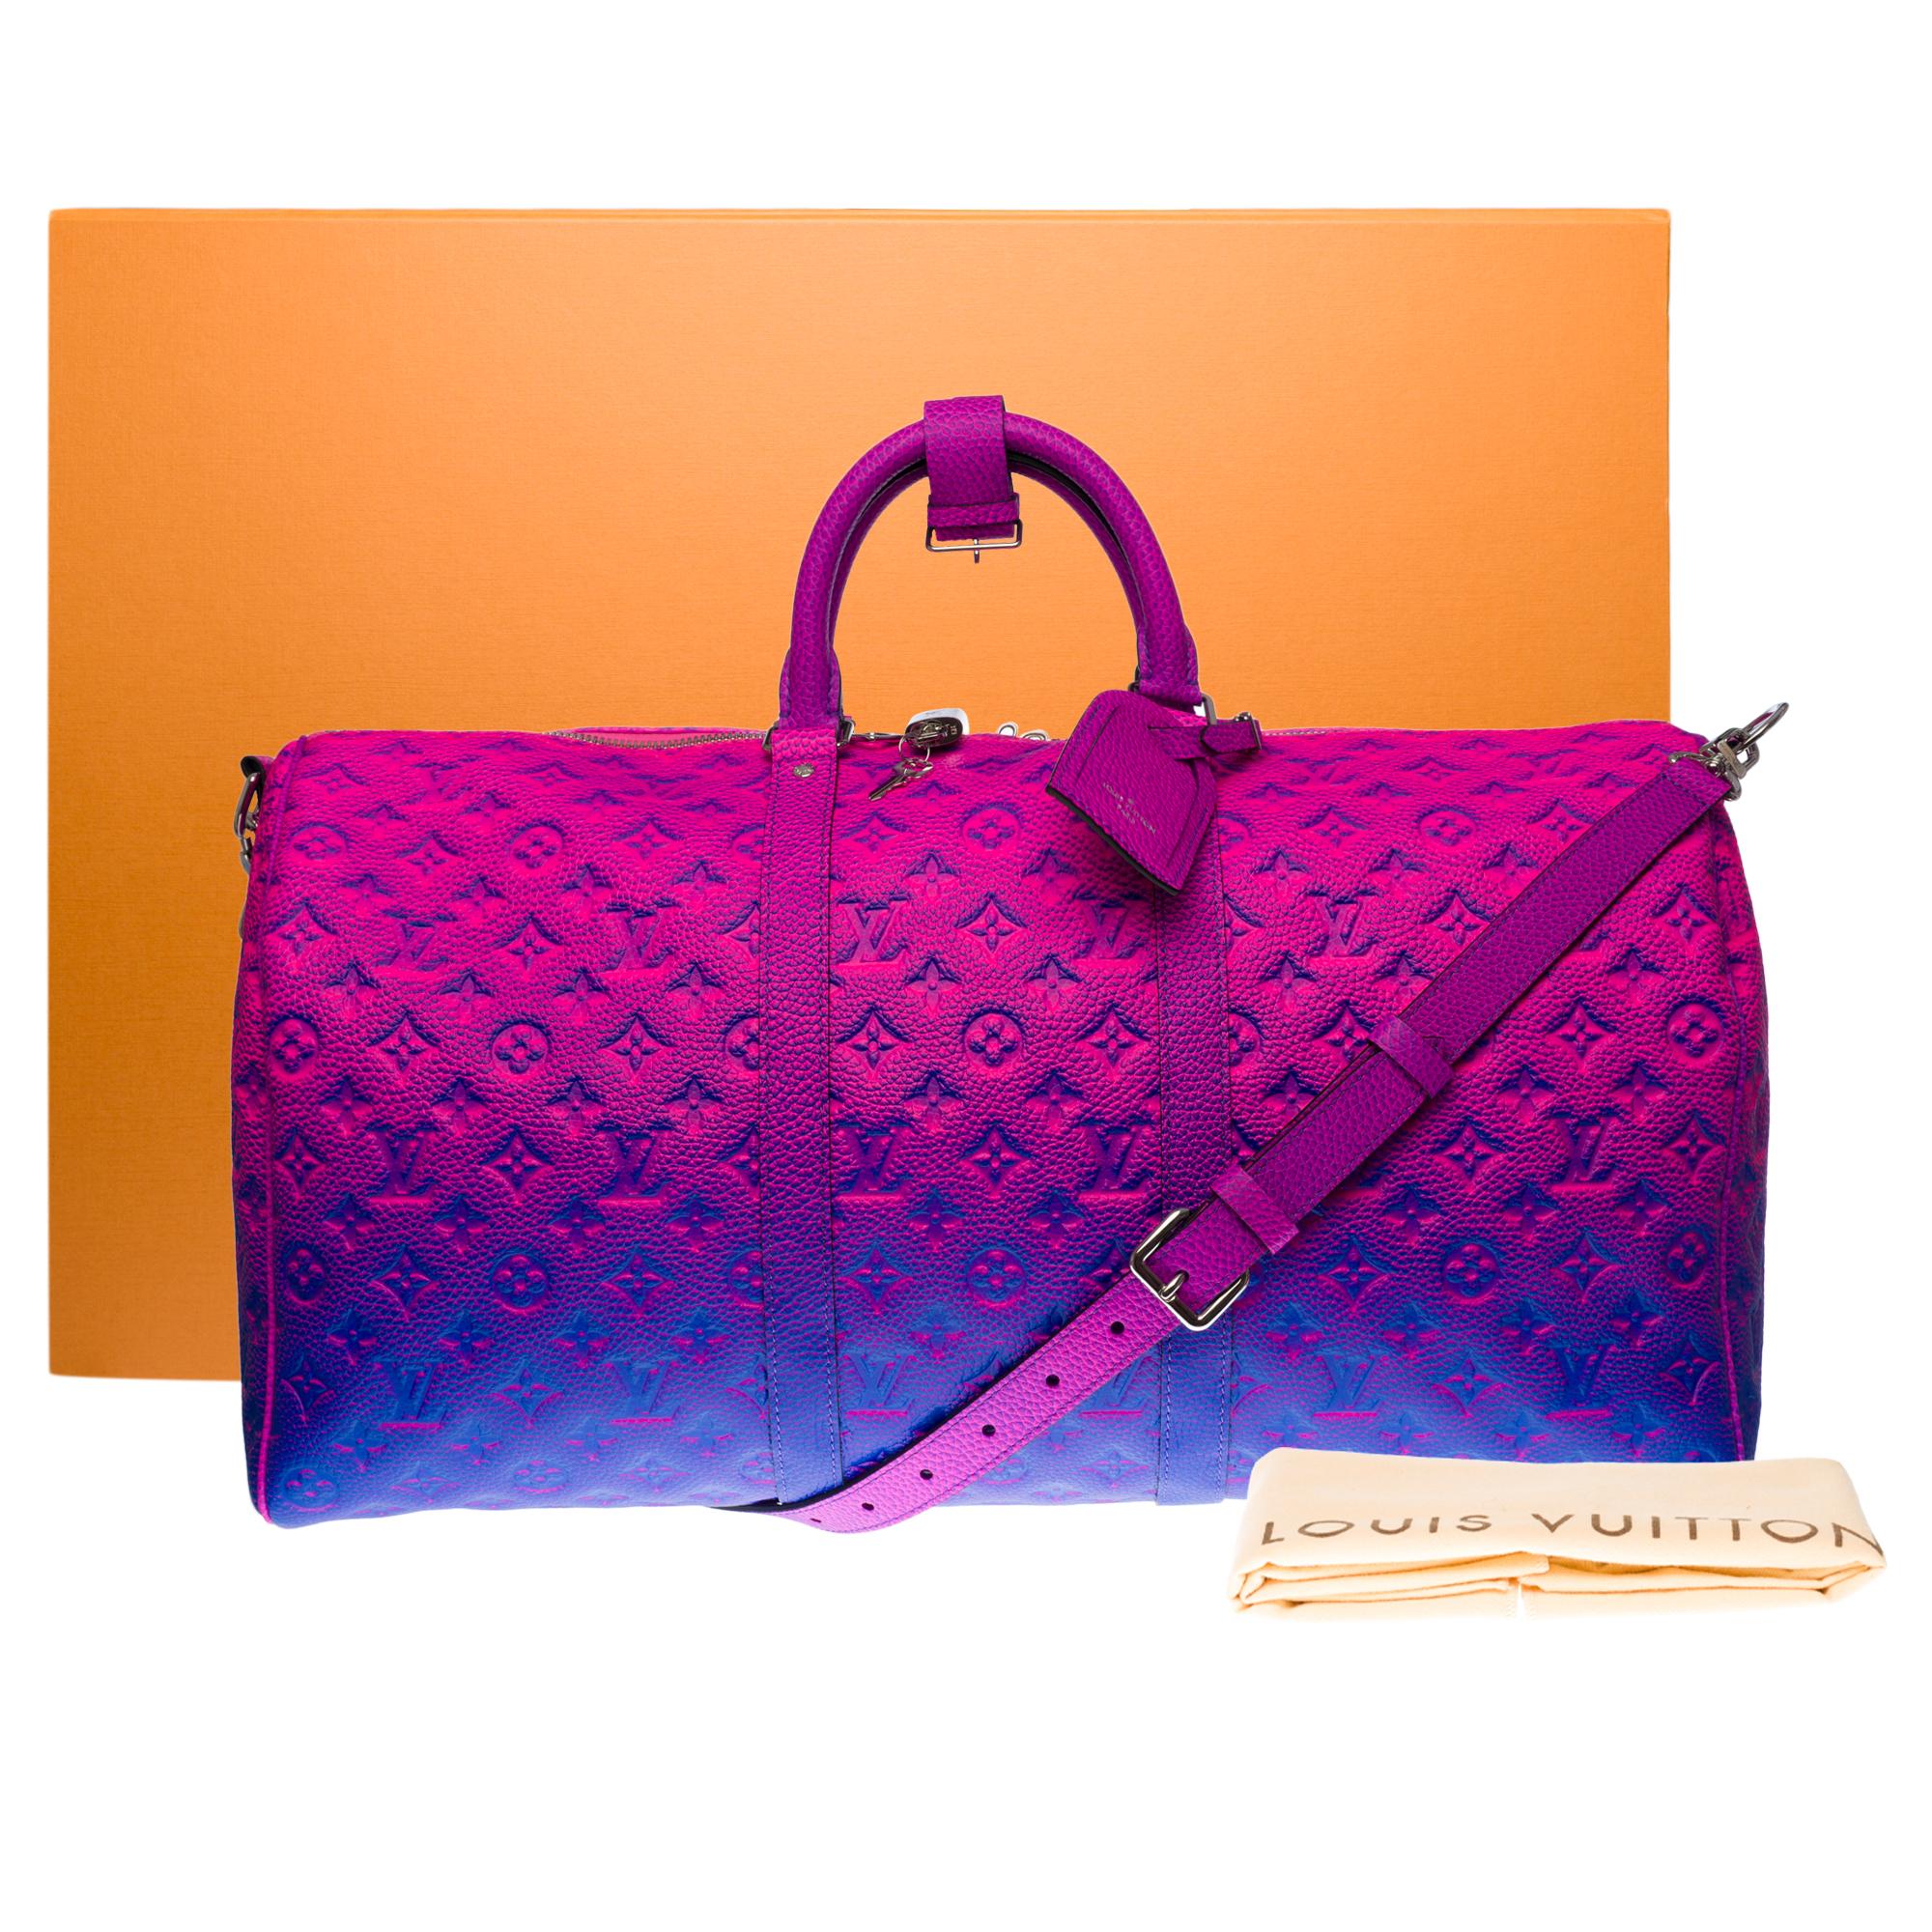 NEW-Louis Vuitton keepall 50 strap Travel bag Spray in Pink/Blue / Virgil Abloh 3